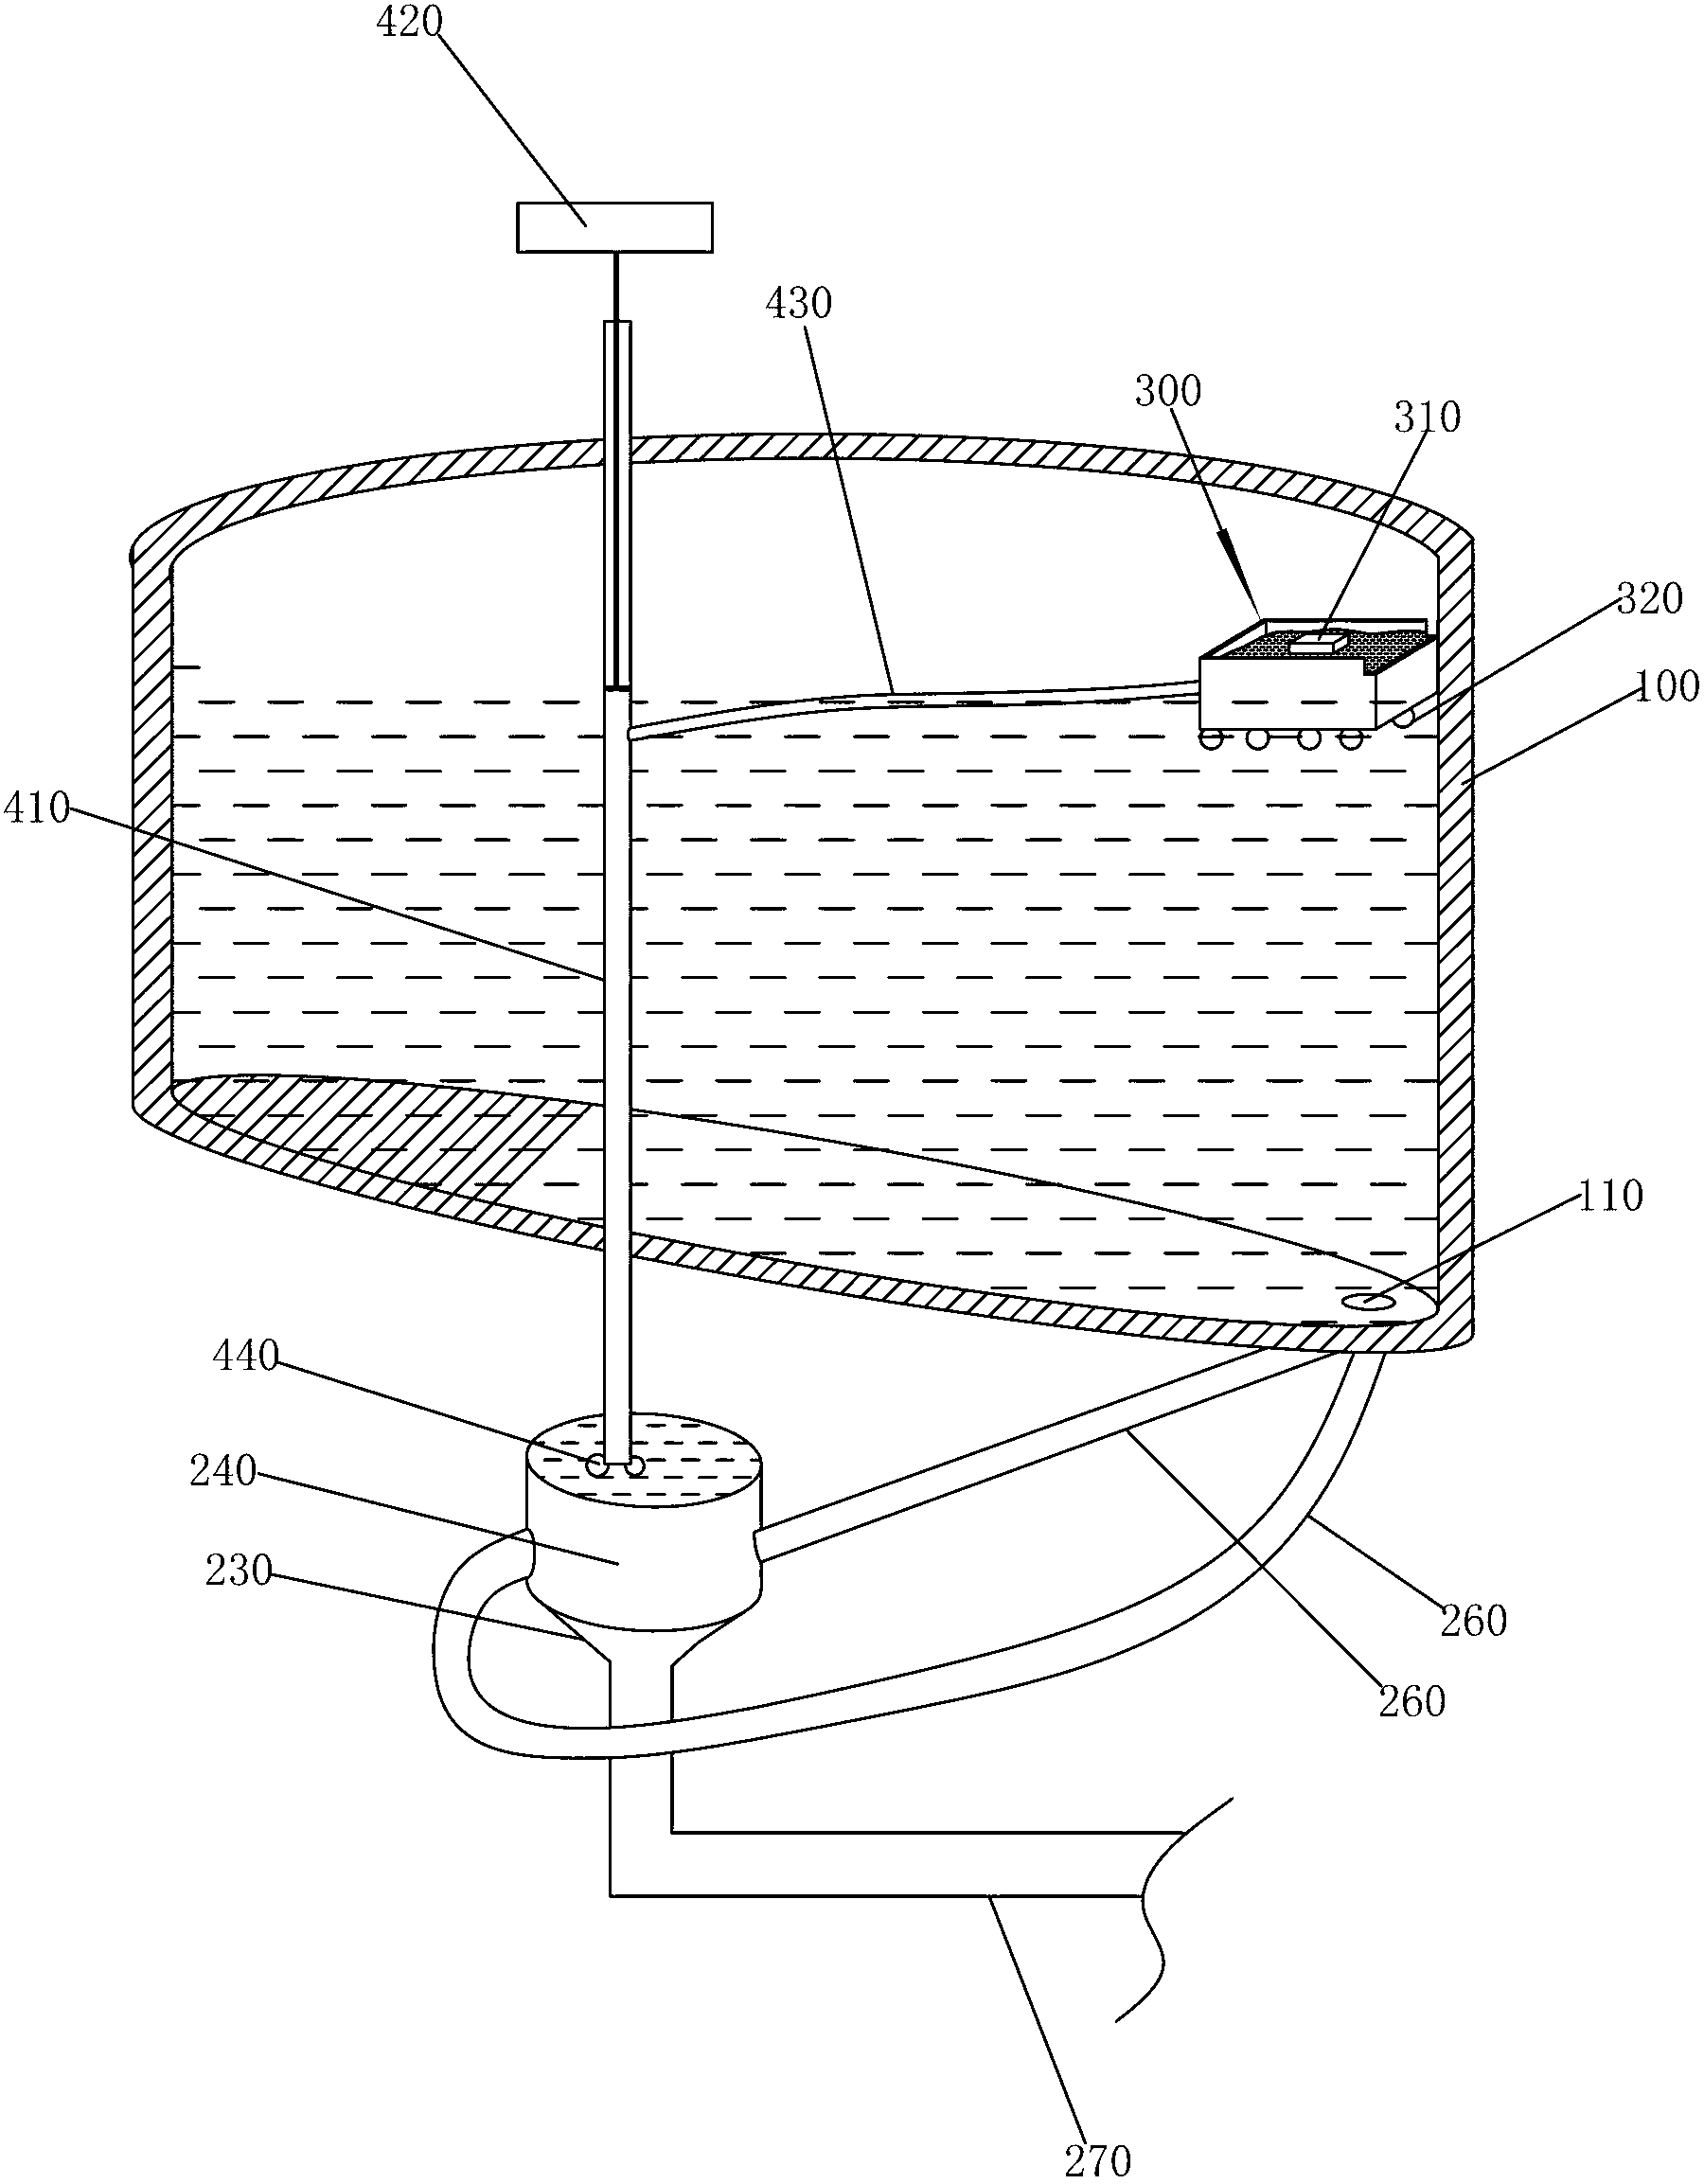 Circulating water device for shrimp aquaculture and operating method thereof